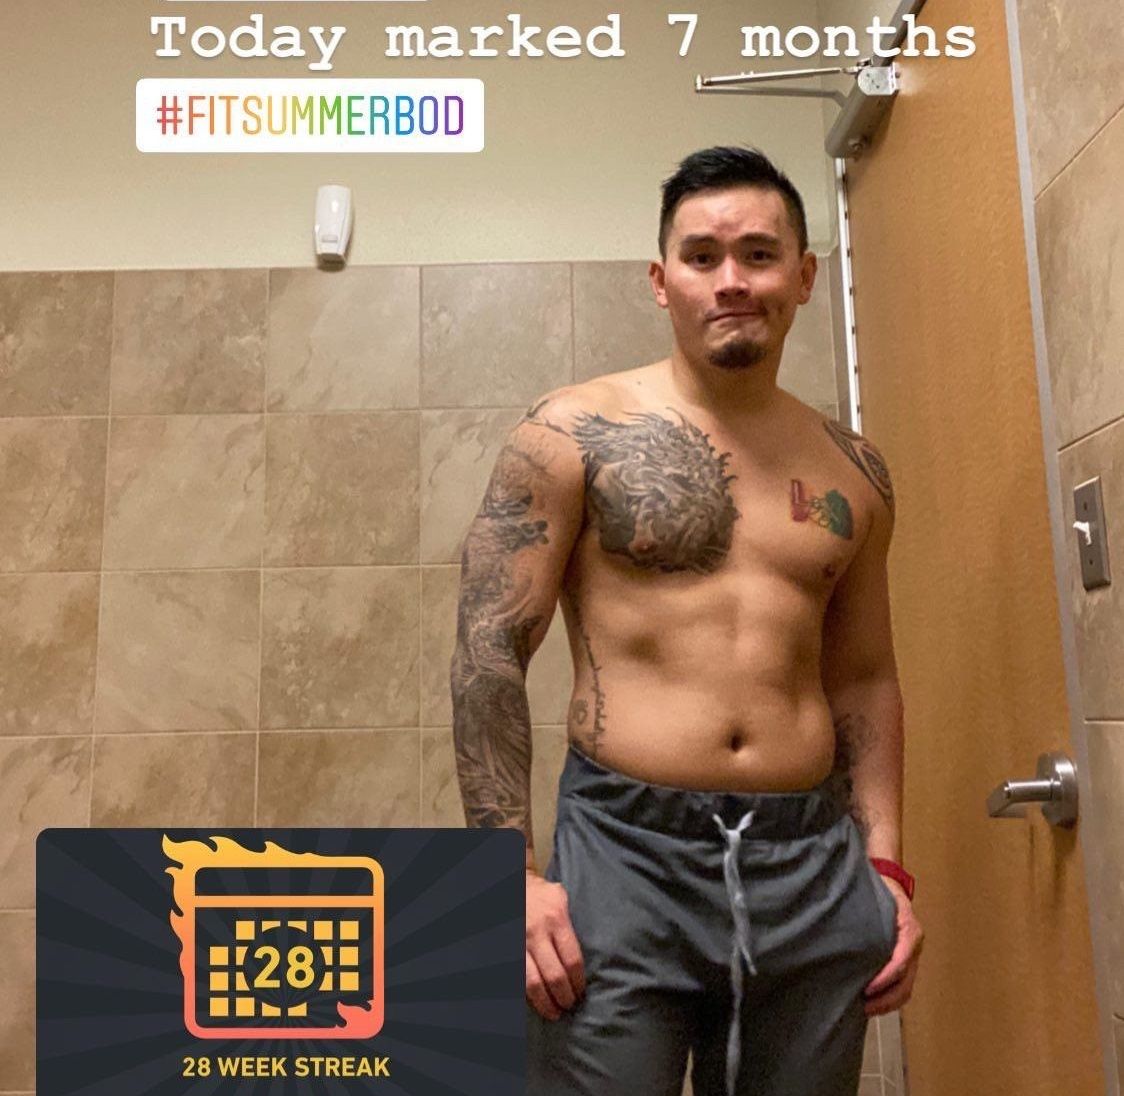 Fitbod results after 7 months